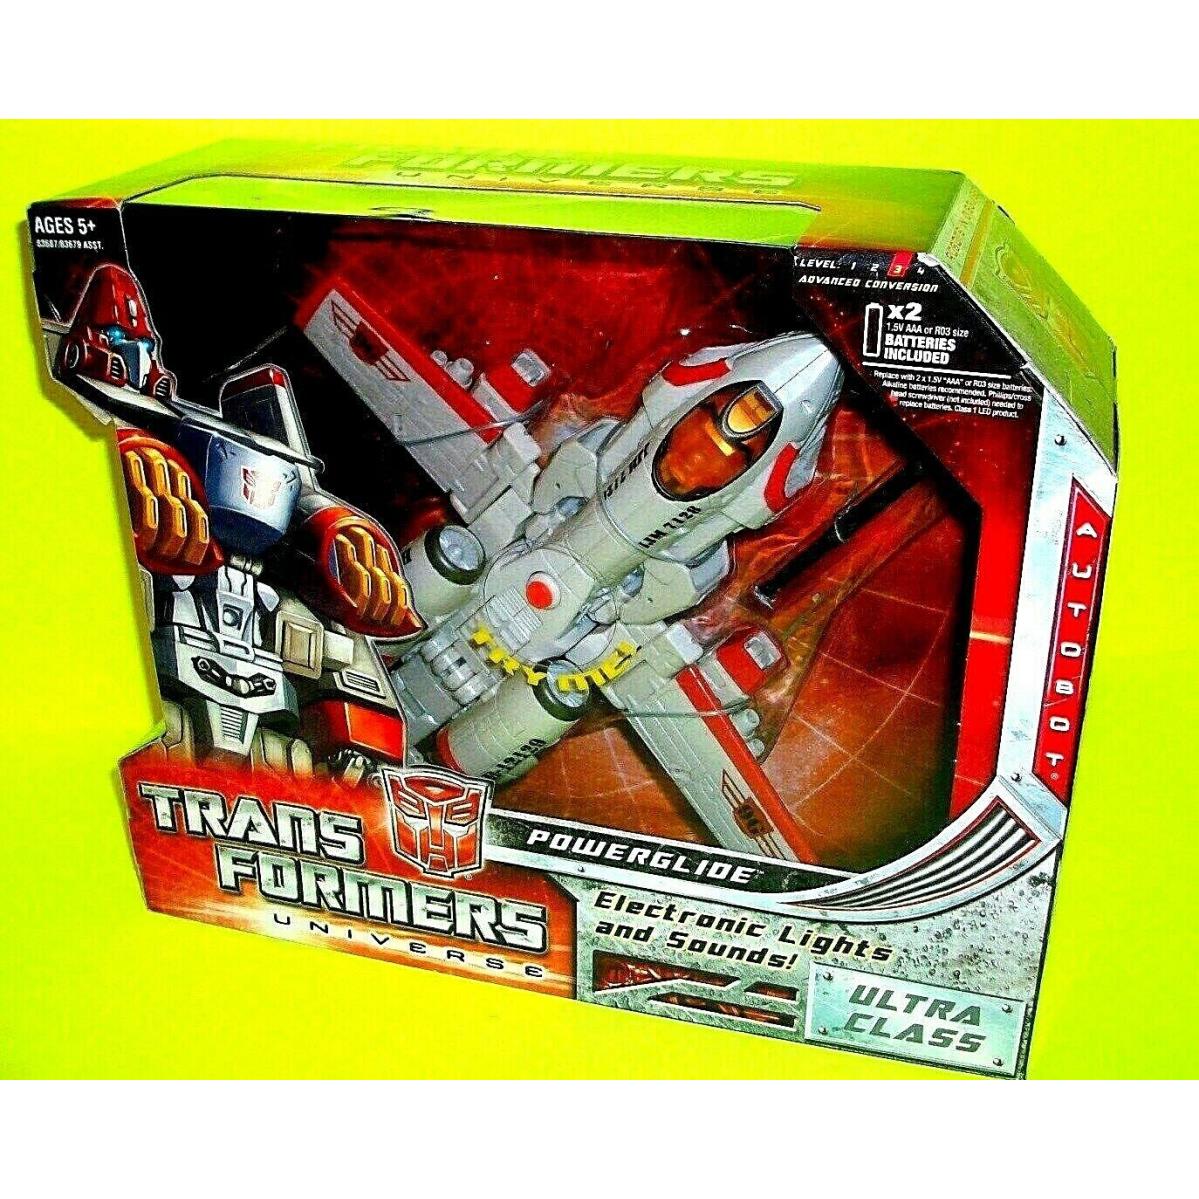 Hasbro Powerglide Transformers Ultra Class Fighter Jet Plane Movie Toy Action Figure